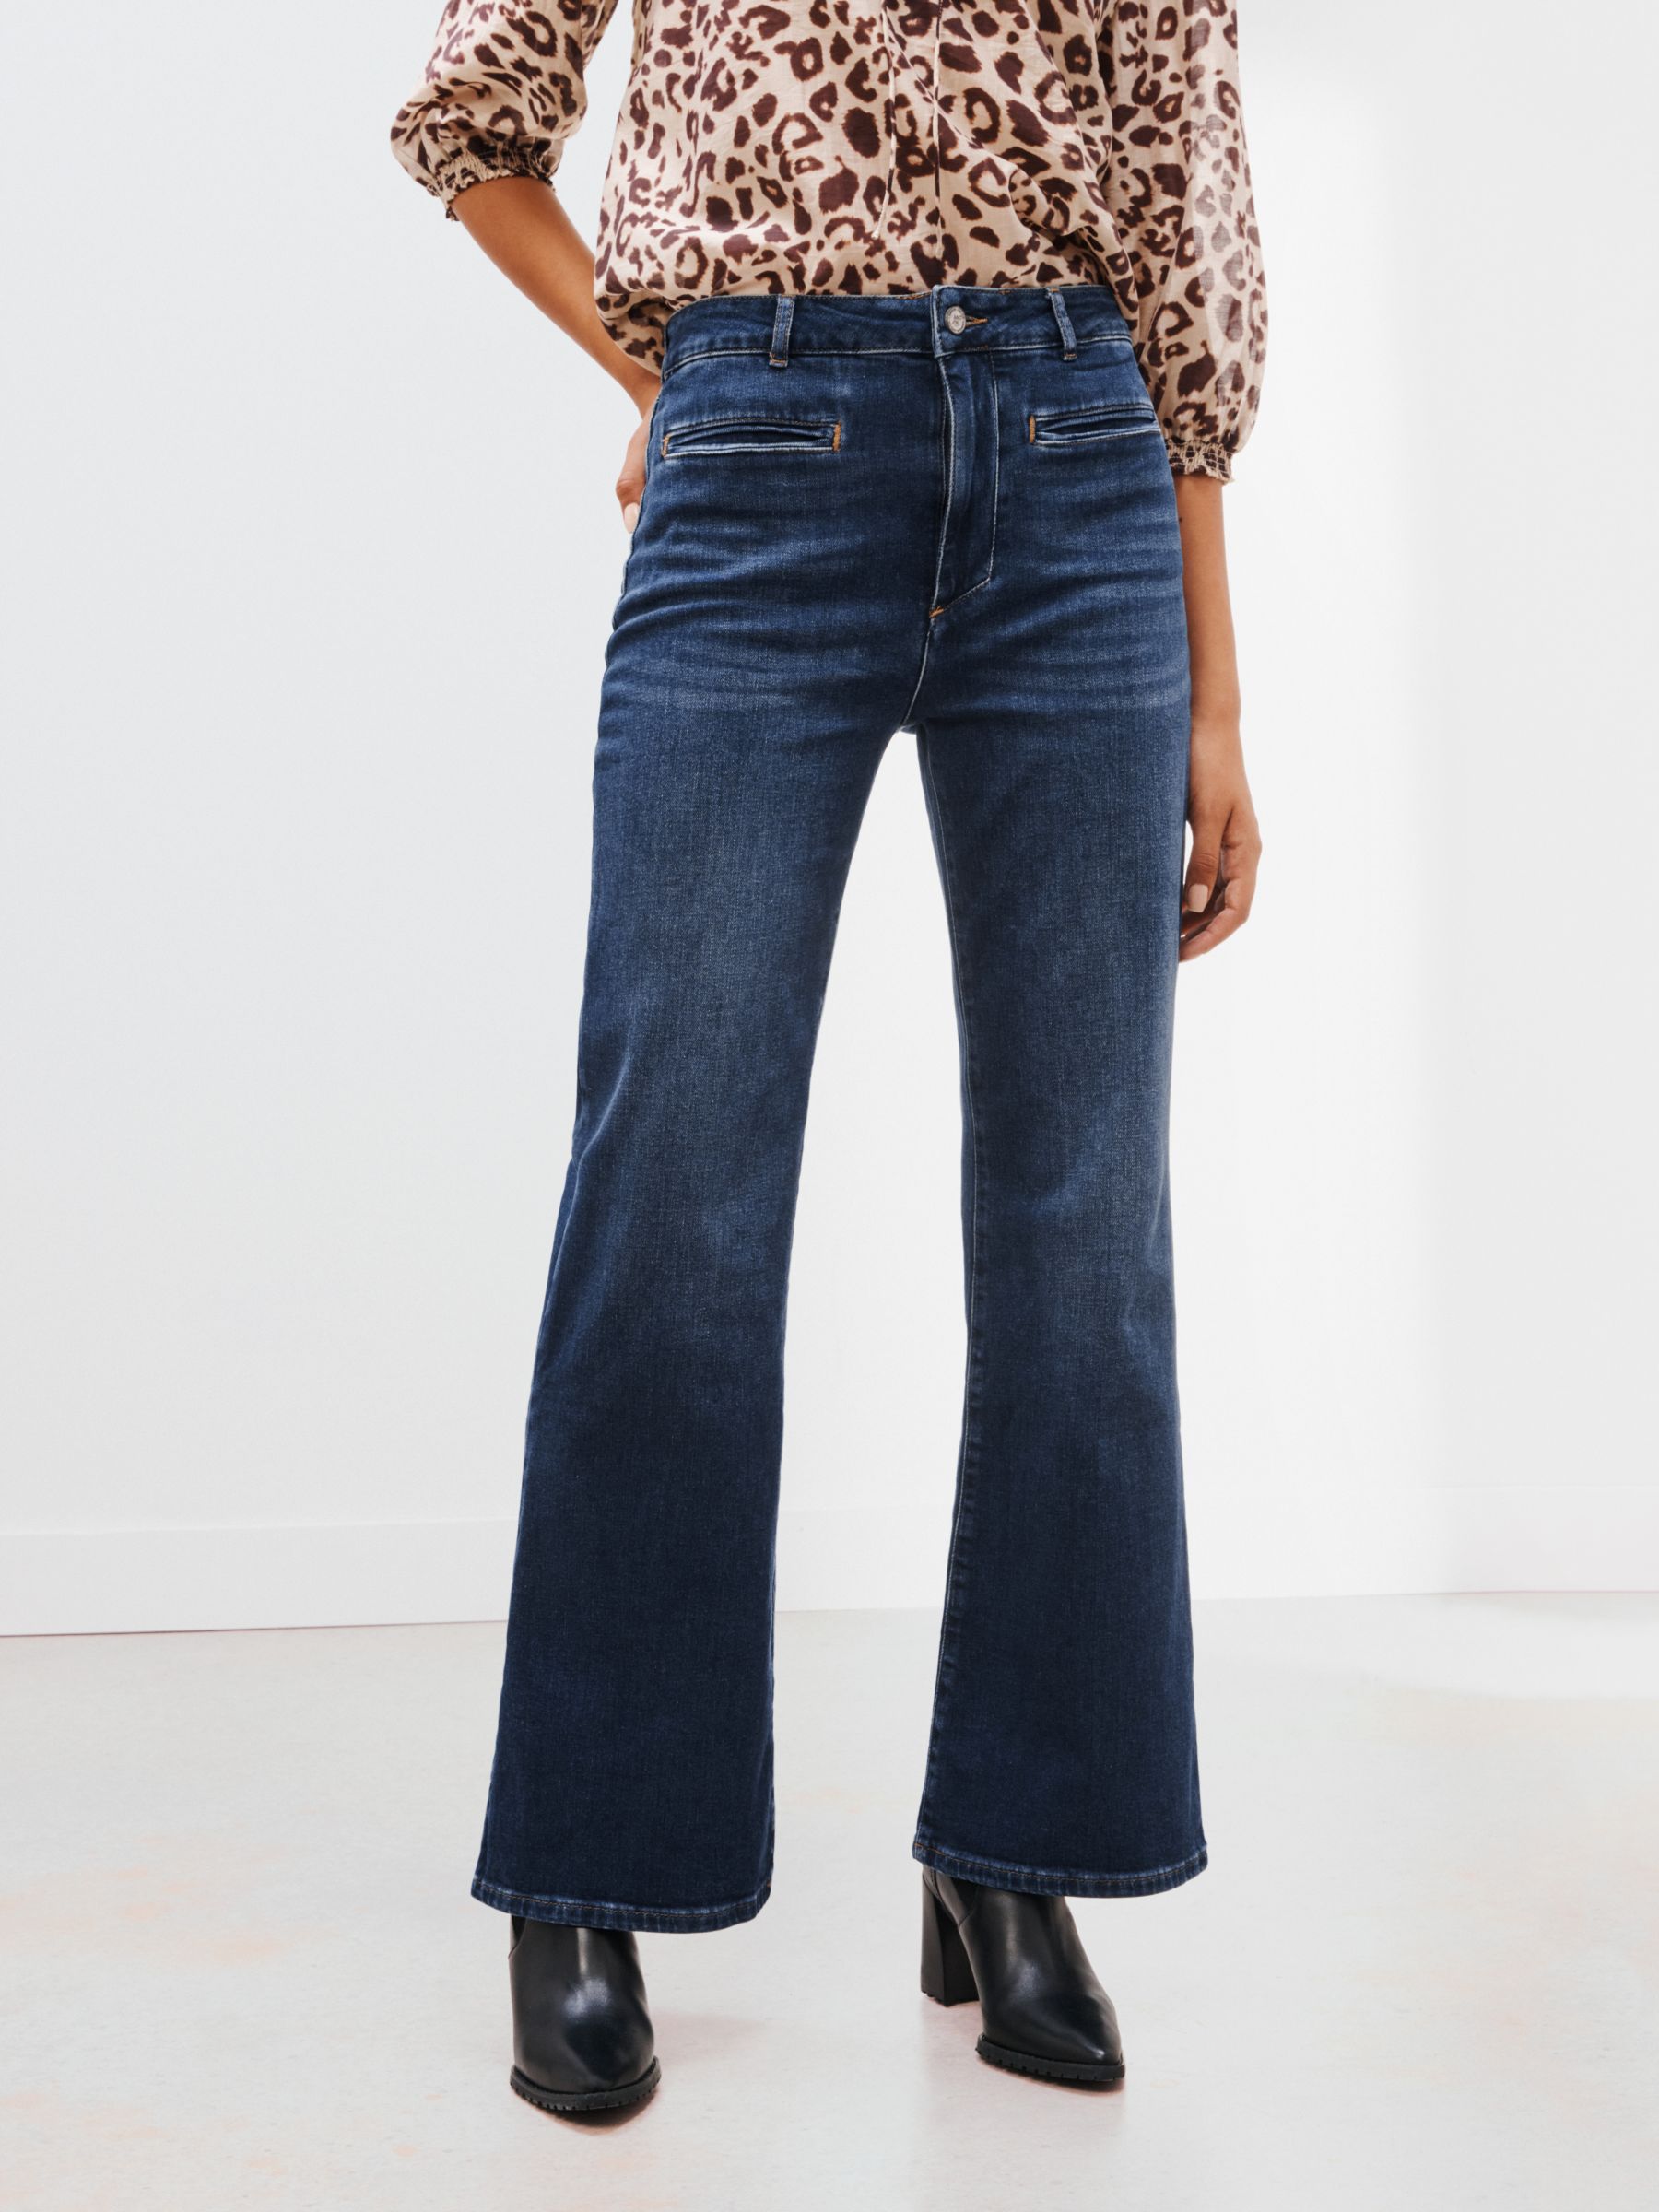 AND/OR Belmont Flared Jeans, Azurite at John Lewis & Partners